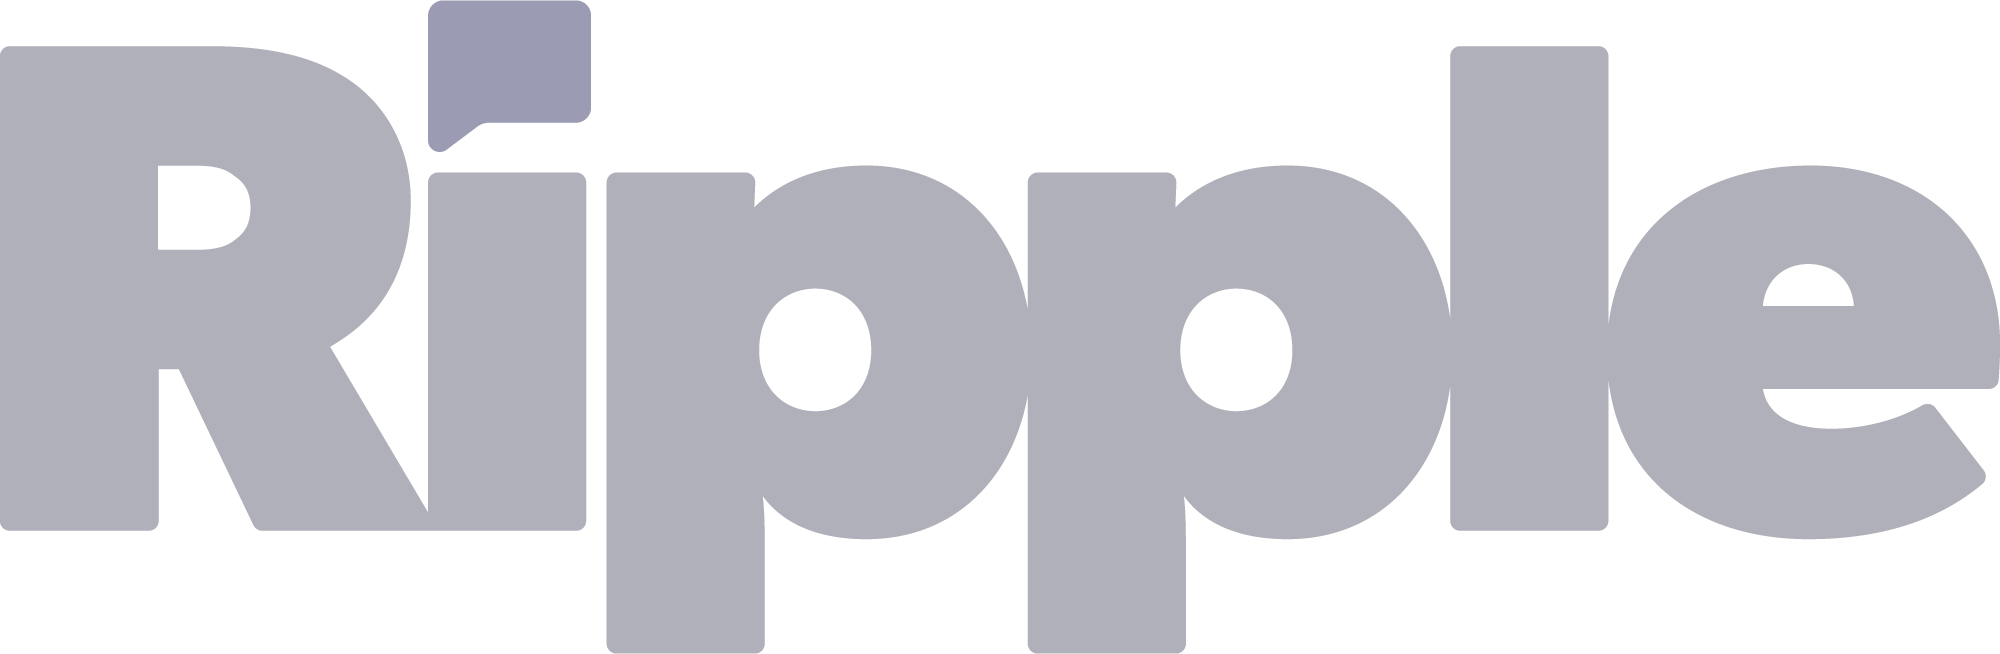 Ripple logo: The company name 'Ripple' written in a stylized font